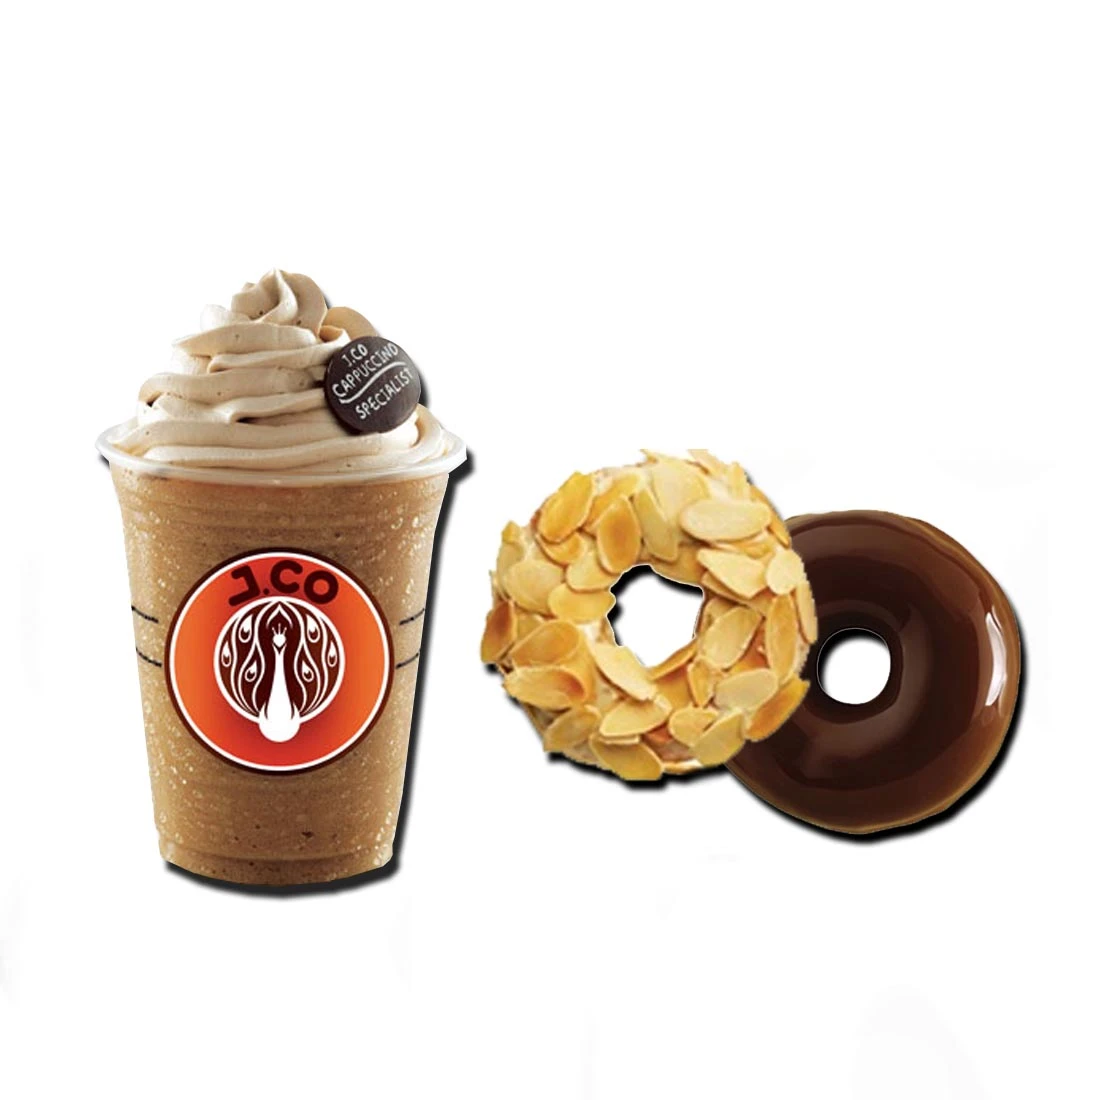 Free J.Co Donuts for every drink purchase